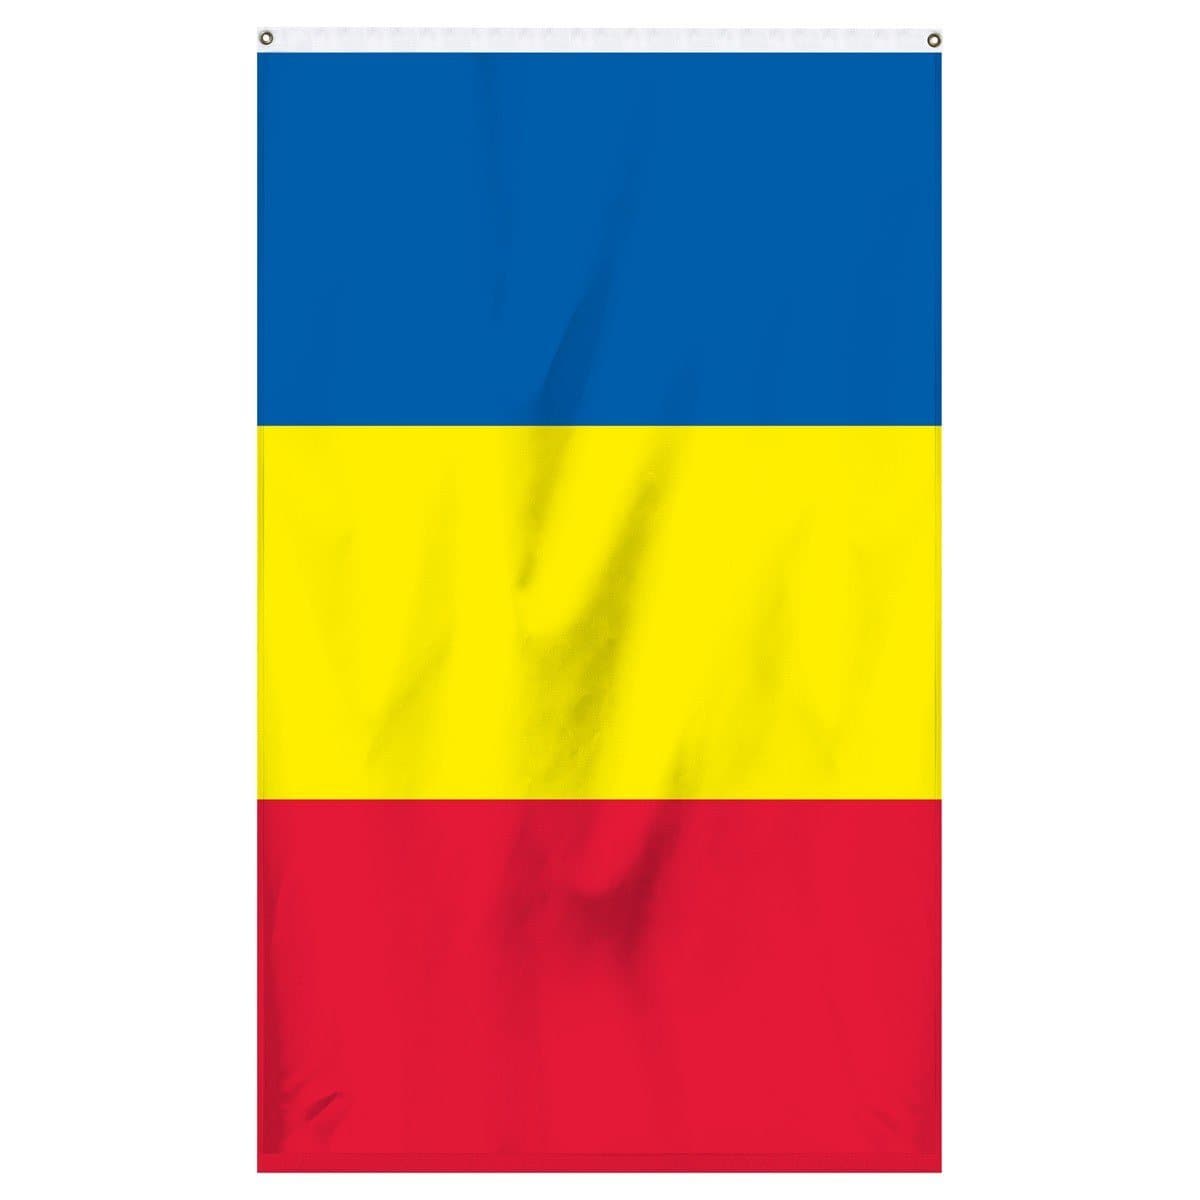 Romania national flag for sale to buy online now from an American company